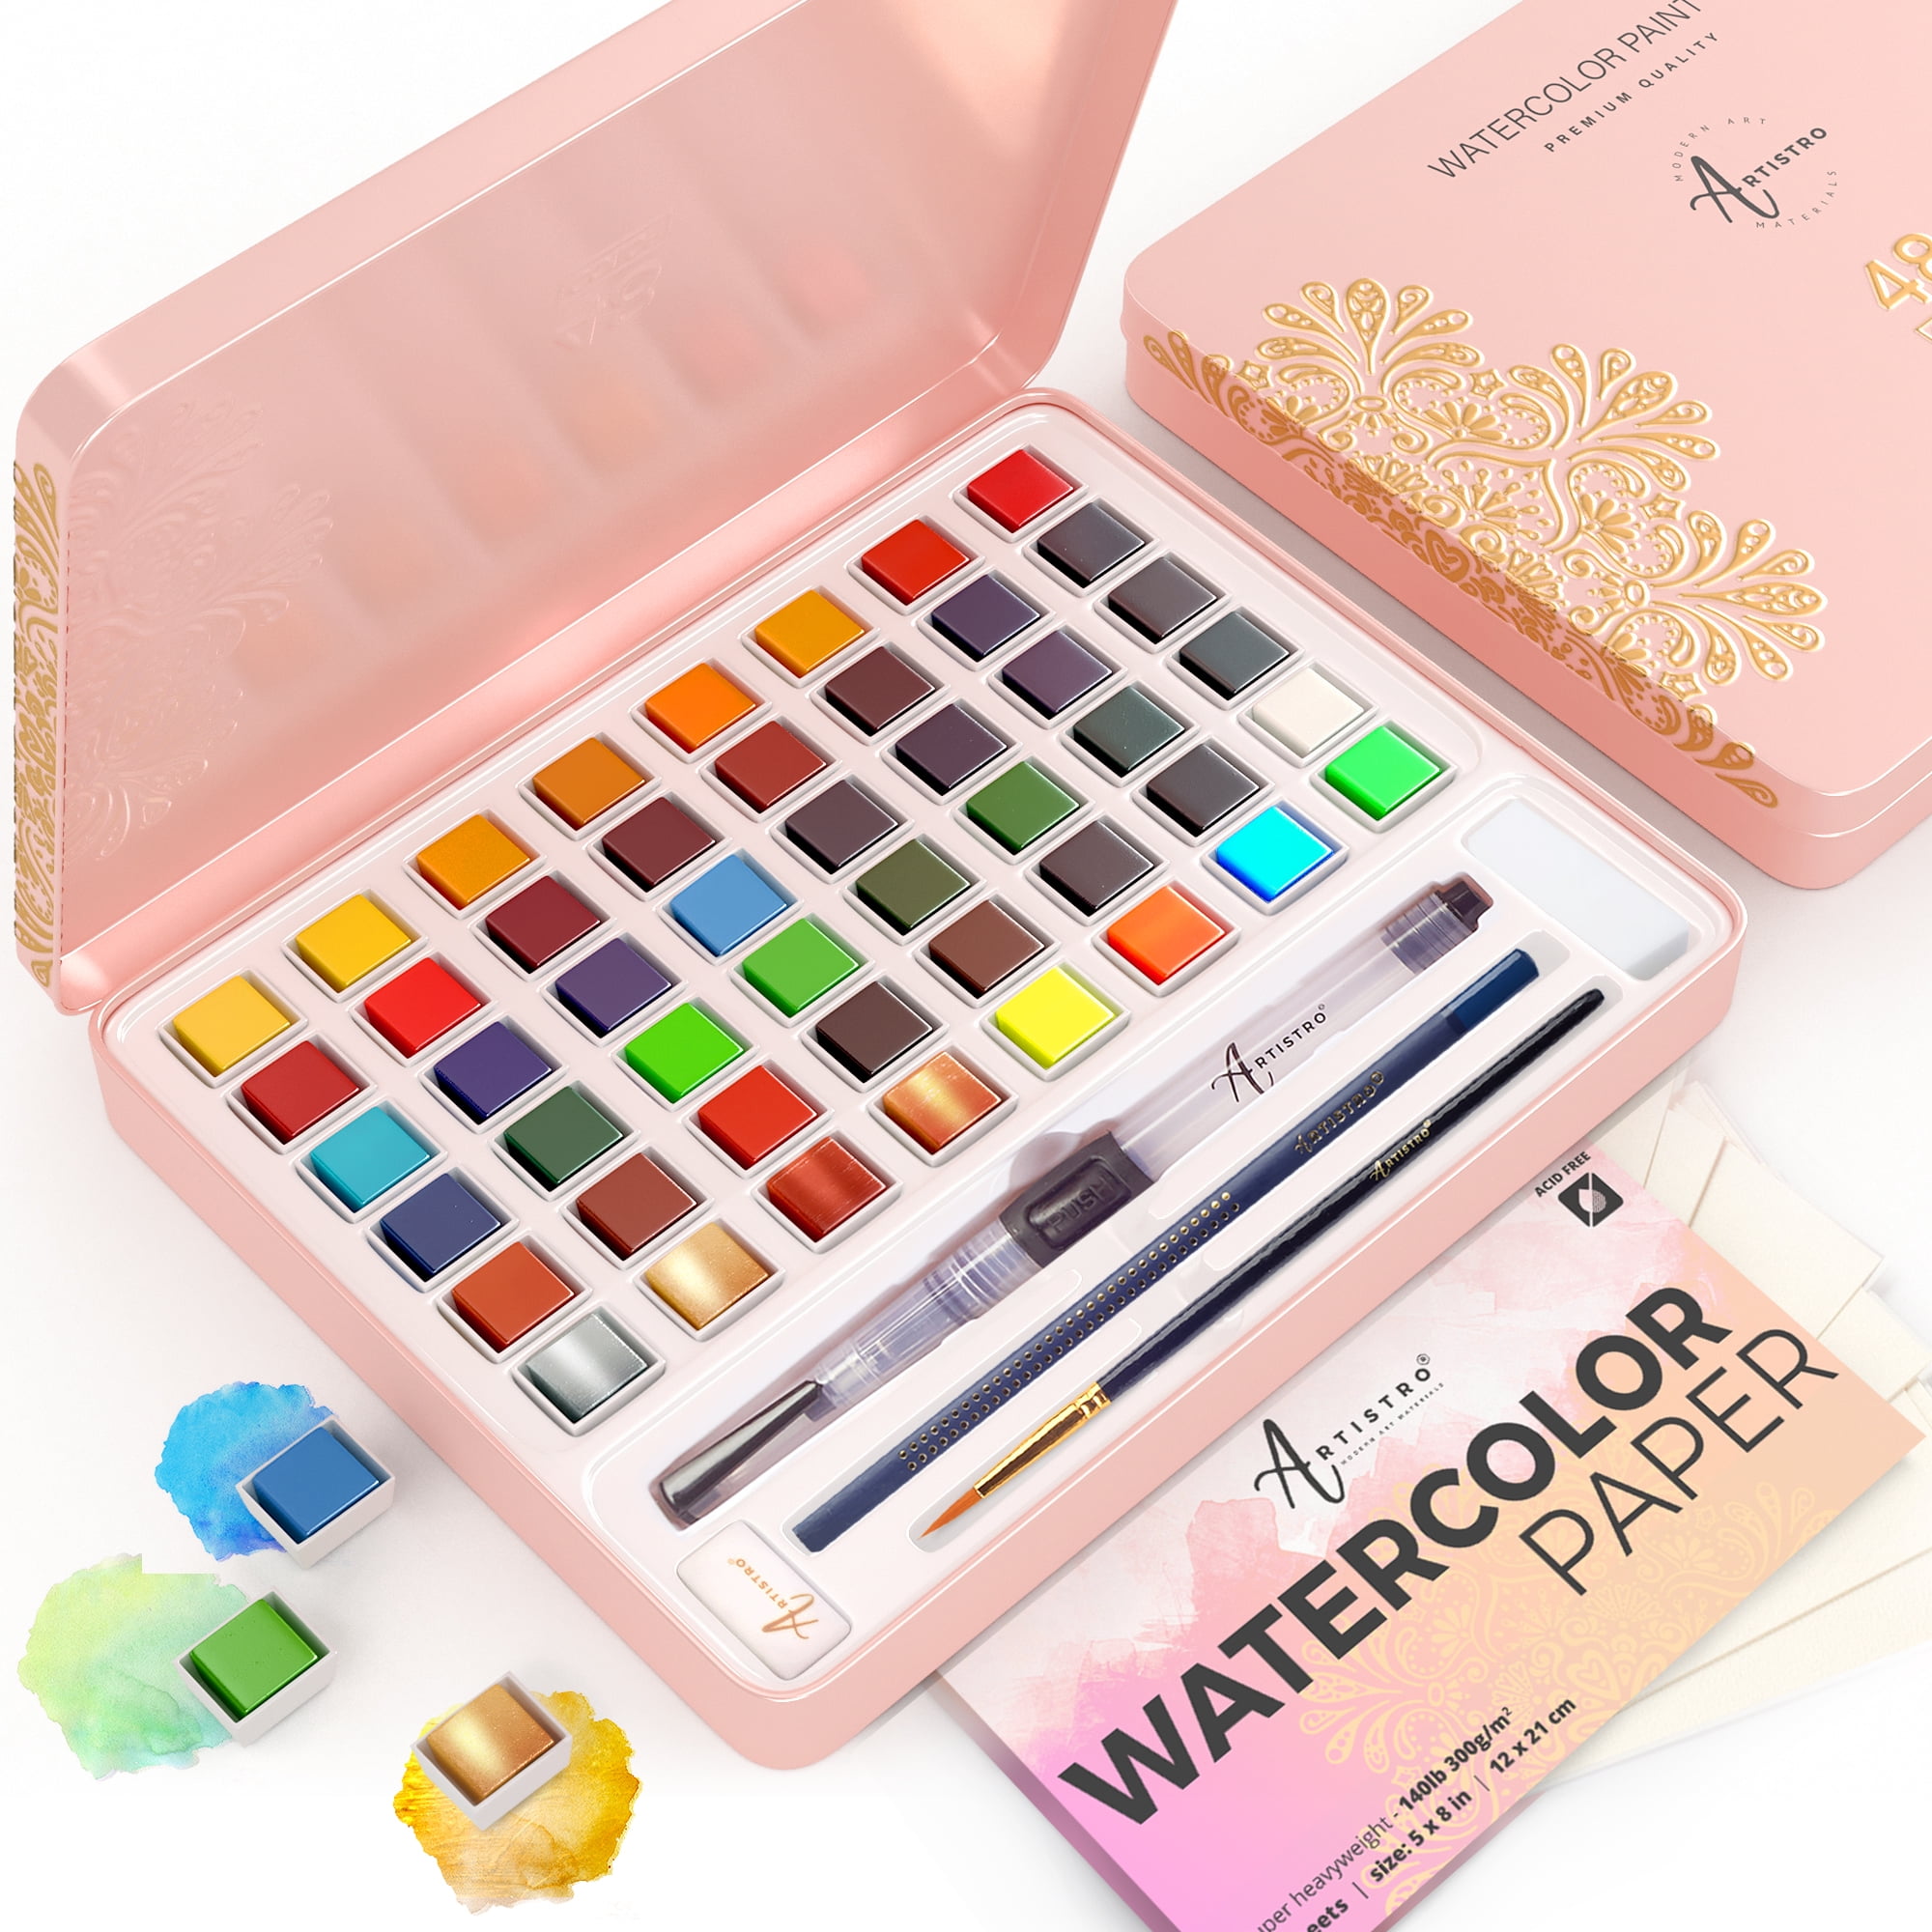  ARTISTRO Watercolor Paint Set, 48 Vivid Colors in Portable Box,  Including Metallic and Fluorescent Colors for Artists, Amateur Hobbyists  and Painting Lovers, Perfect For Travel : ARTISTRO: Toys & Games